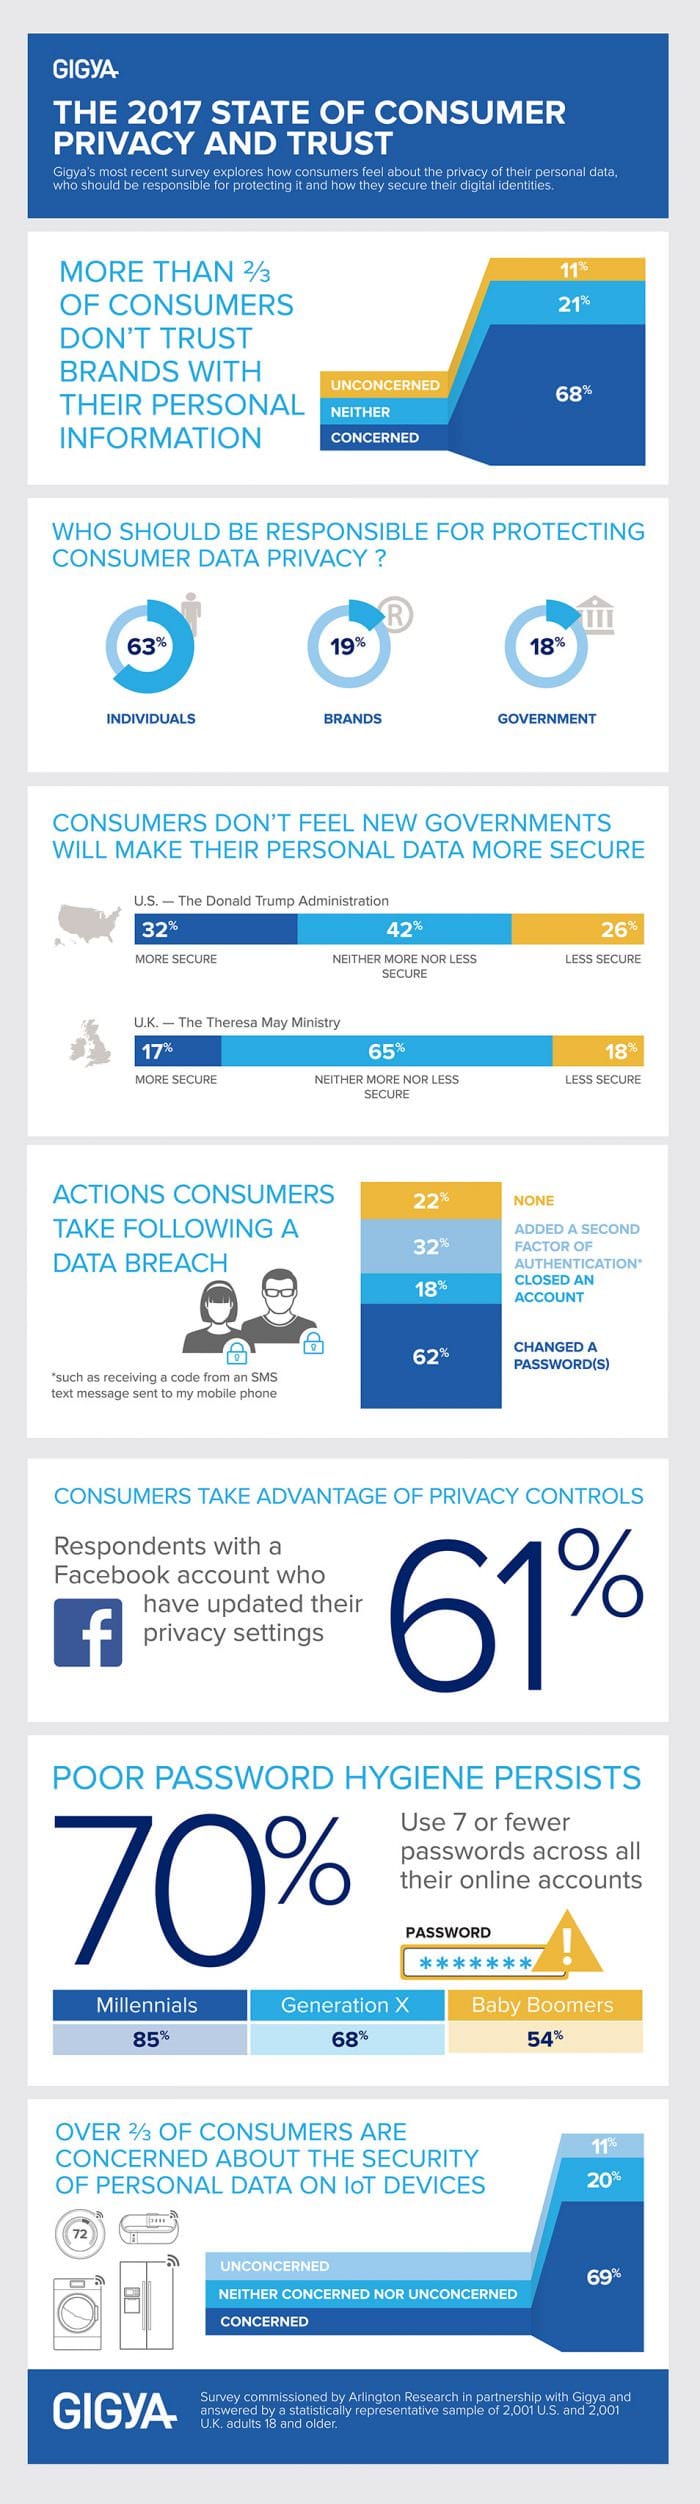 Gigya-Infographic-Privacy-Survey